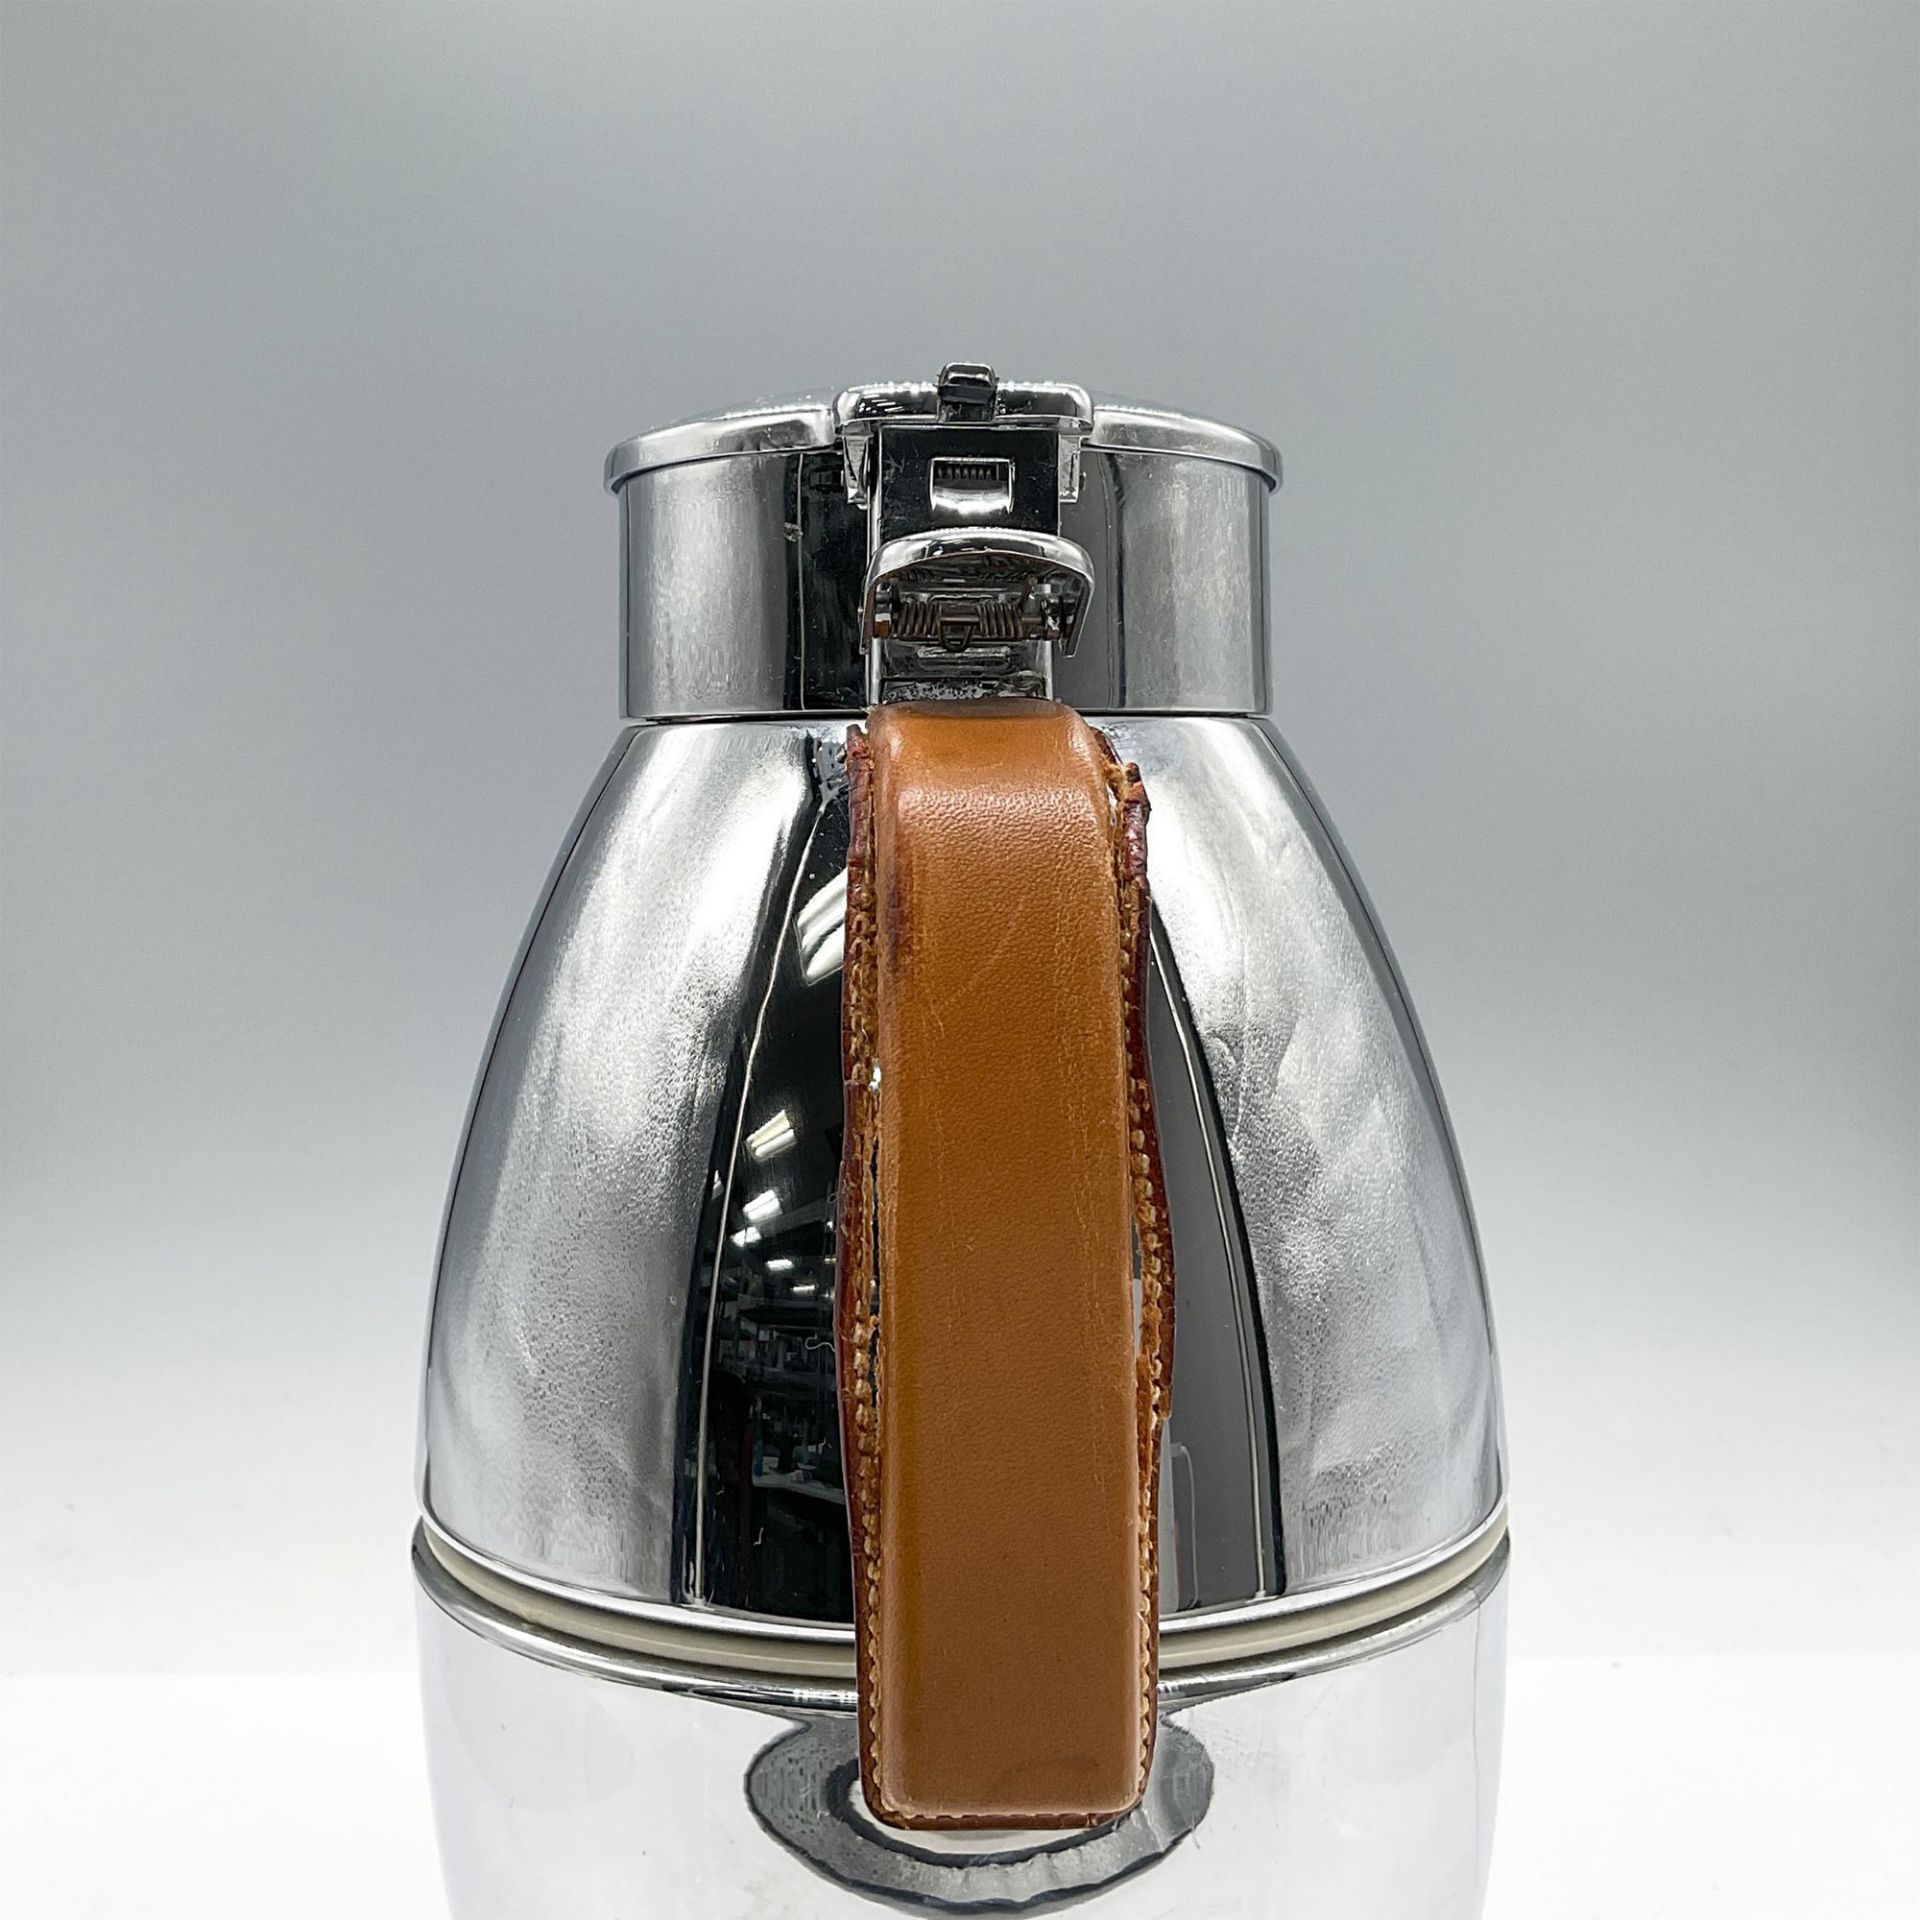 Hermes Chrome Insulated Carafe - Image 3 of 6